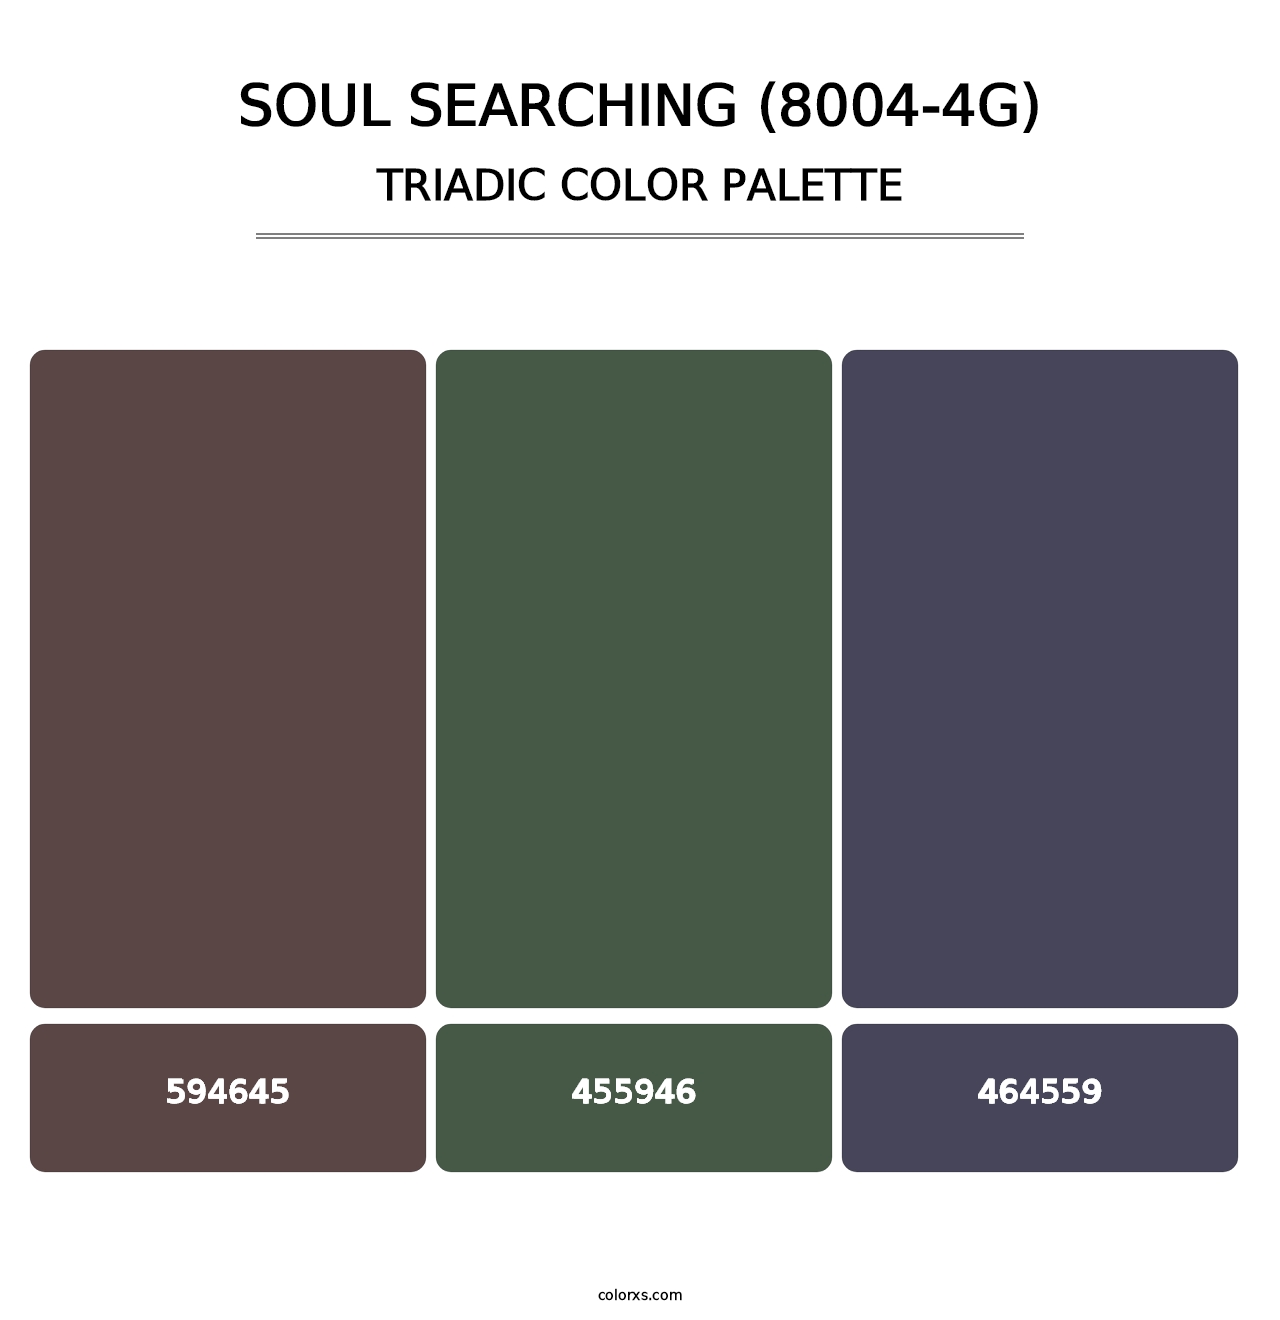 Soul Searching (8004-4G) - Triadic Color Palette